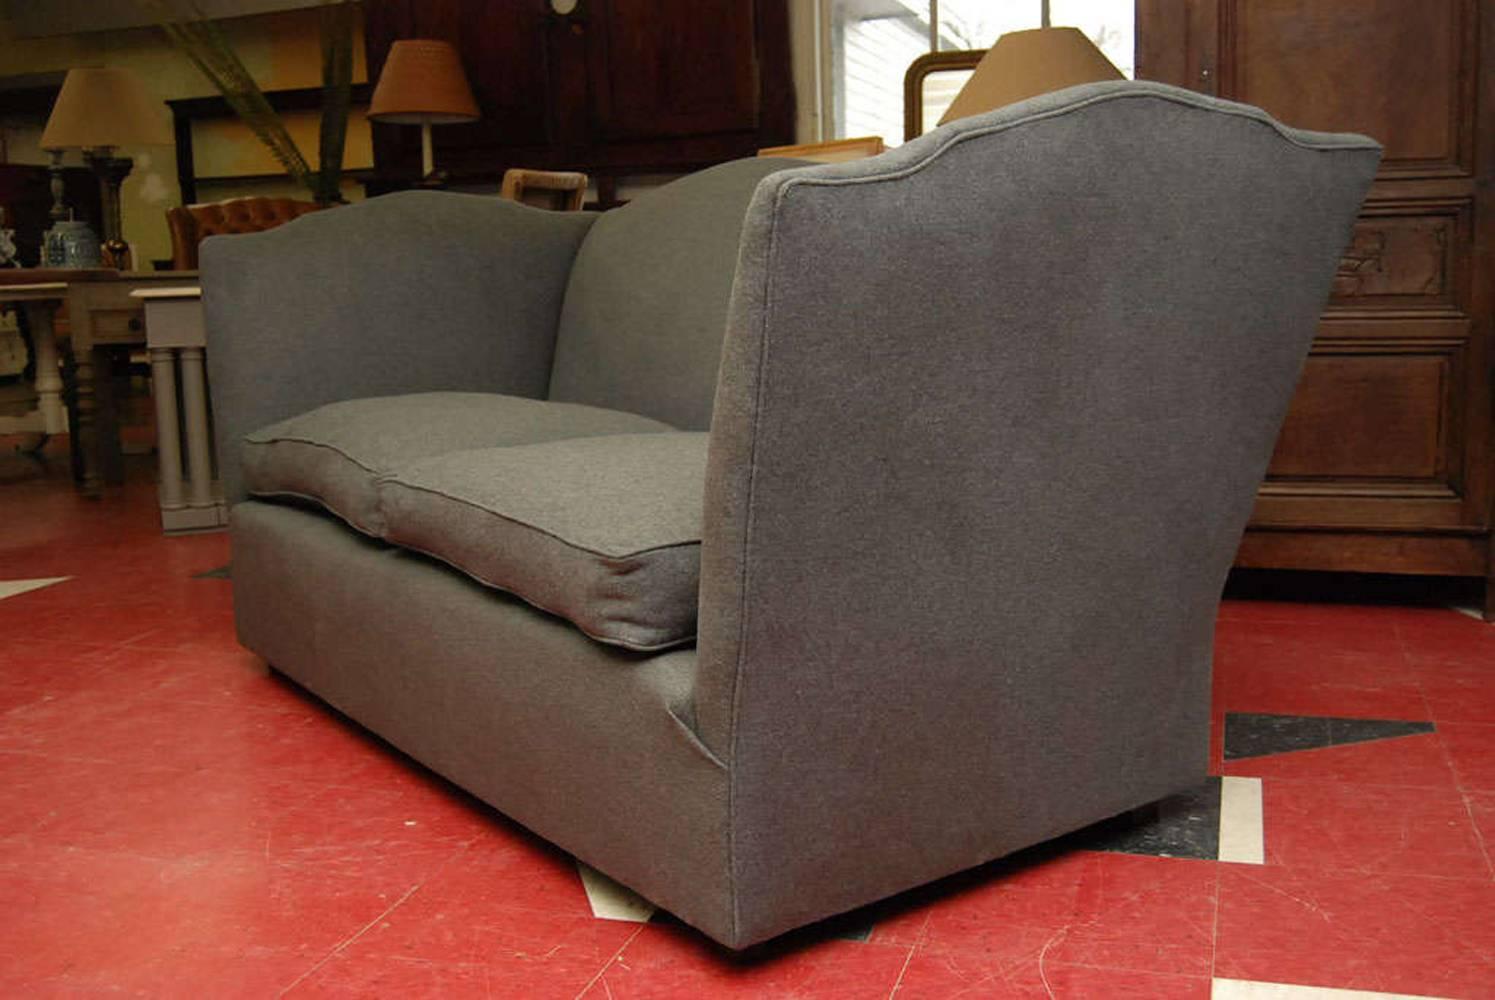 Italian camelback sofa upholstered in charcoal grey wool flannel. Very comfortable with high back and sides.